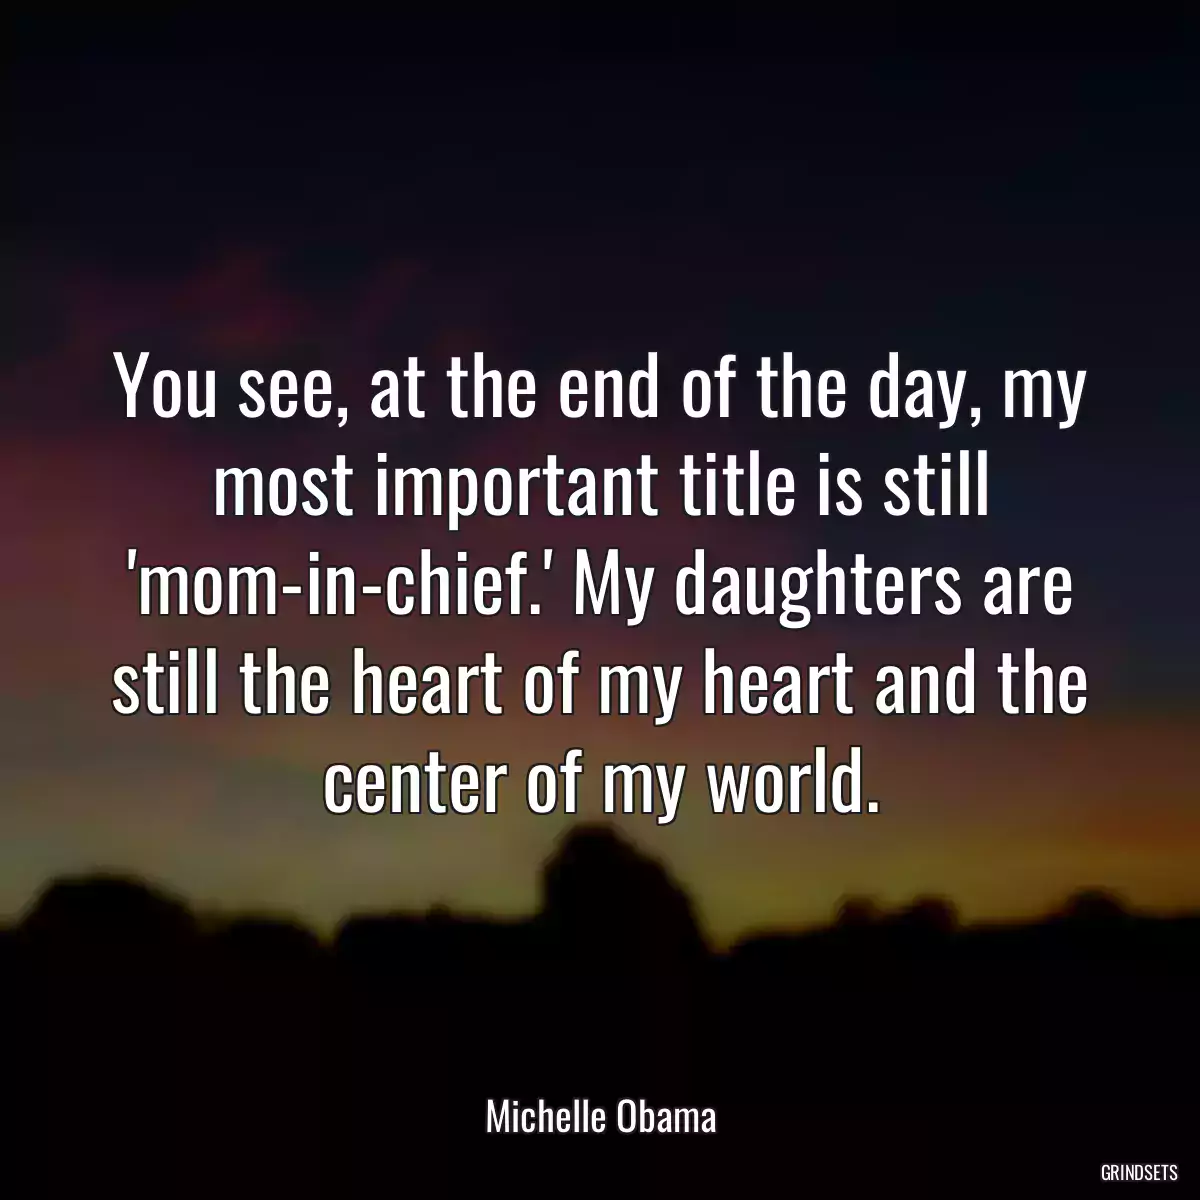 You see, at the end of the day, my most important title is still \'mom-in-chief.\' My daughters are still the heart of my heart and the center of my world.